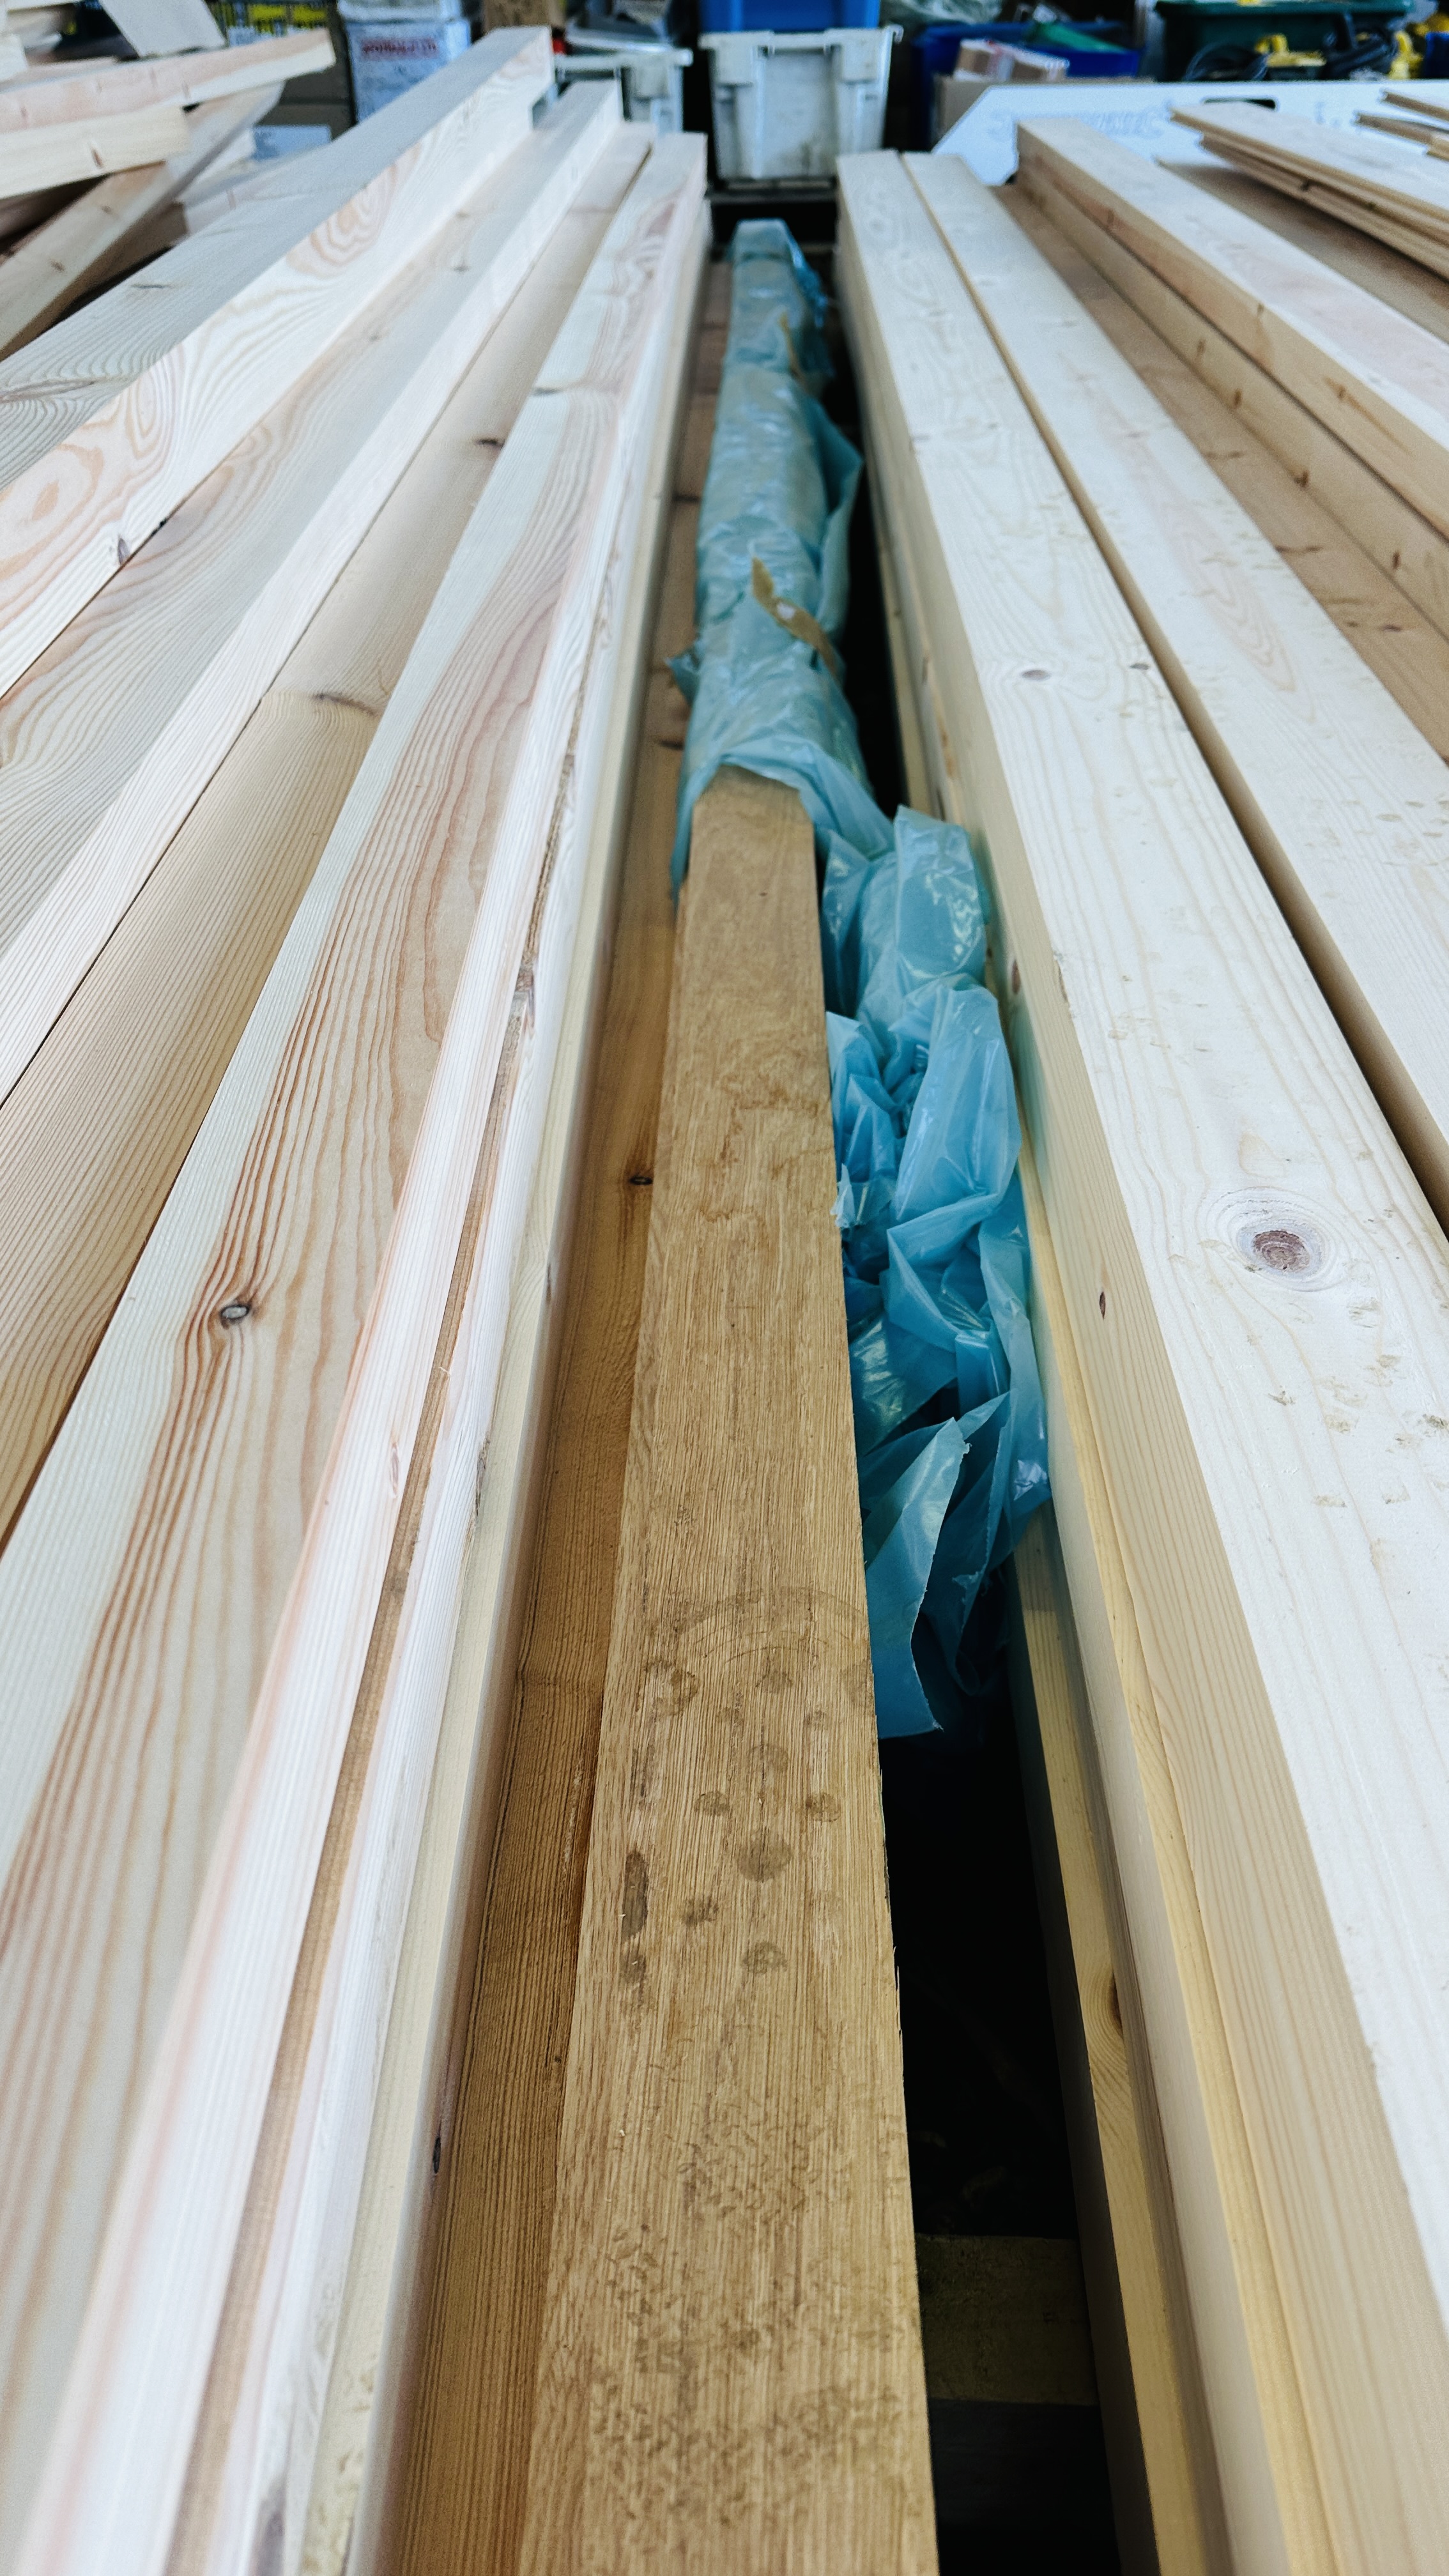 4 X 3.6 METRE LENGTHS OF 70MM X 35MM HARDWOOD. THIS LOT IS SUBJECT TO VAT ON HAMMER PRICE. - Image 4 of 4